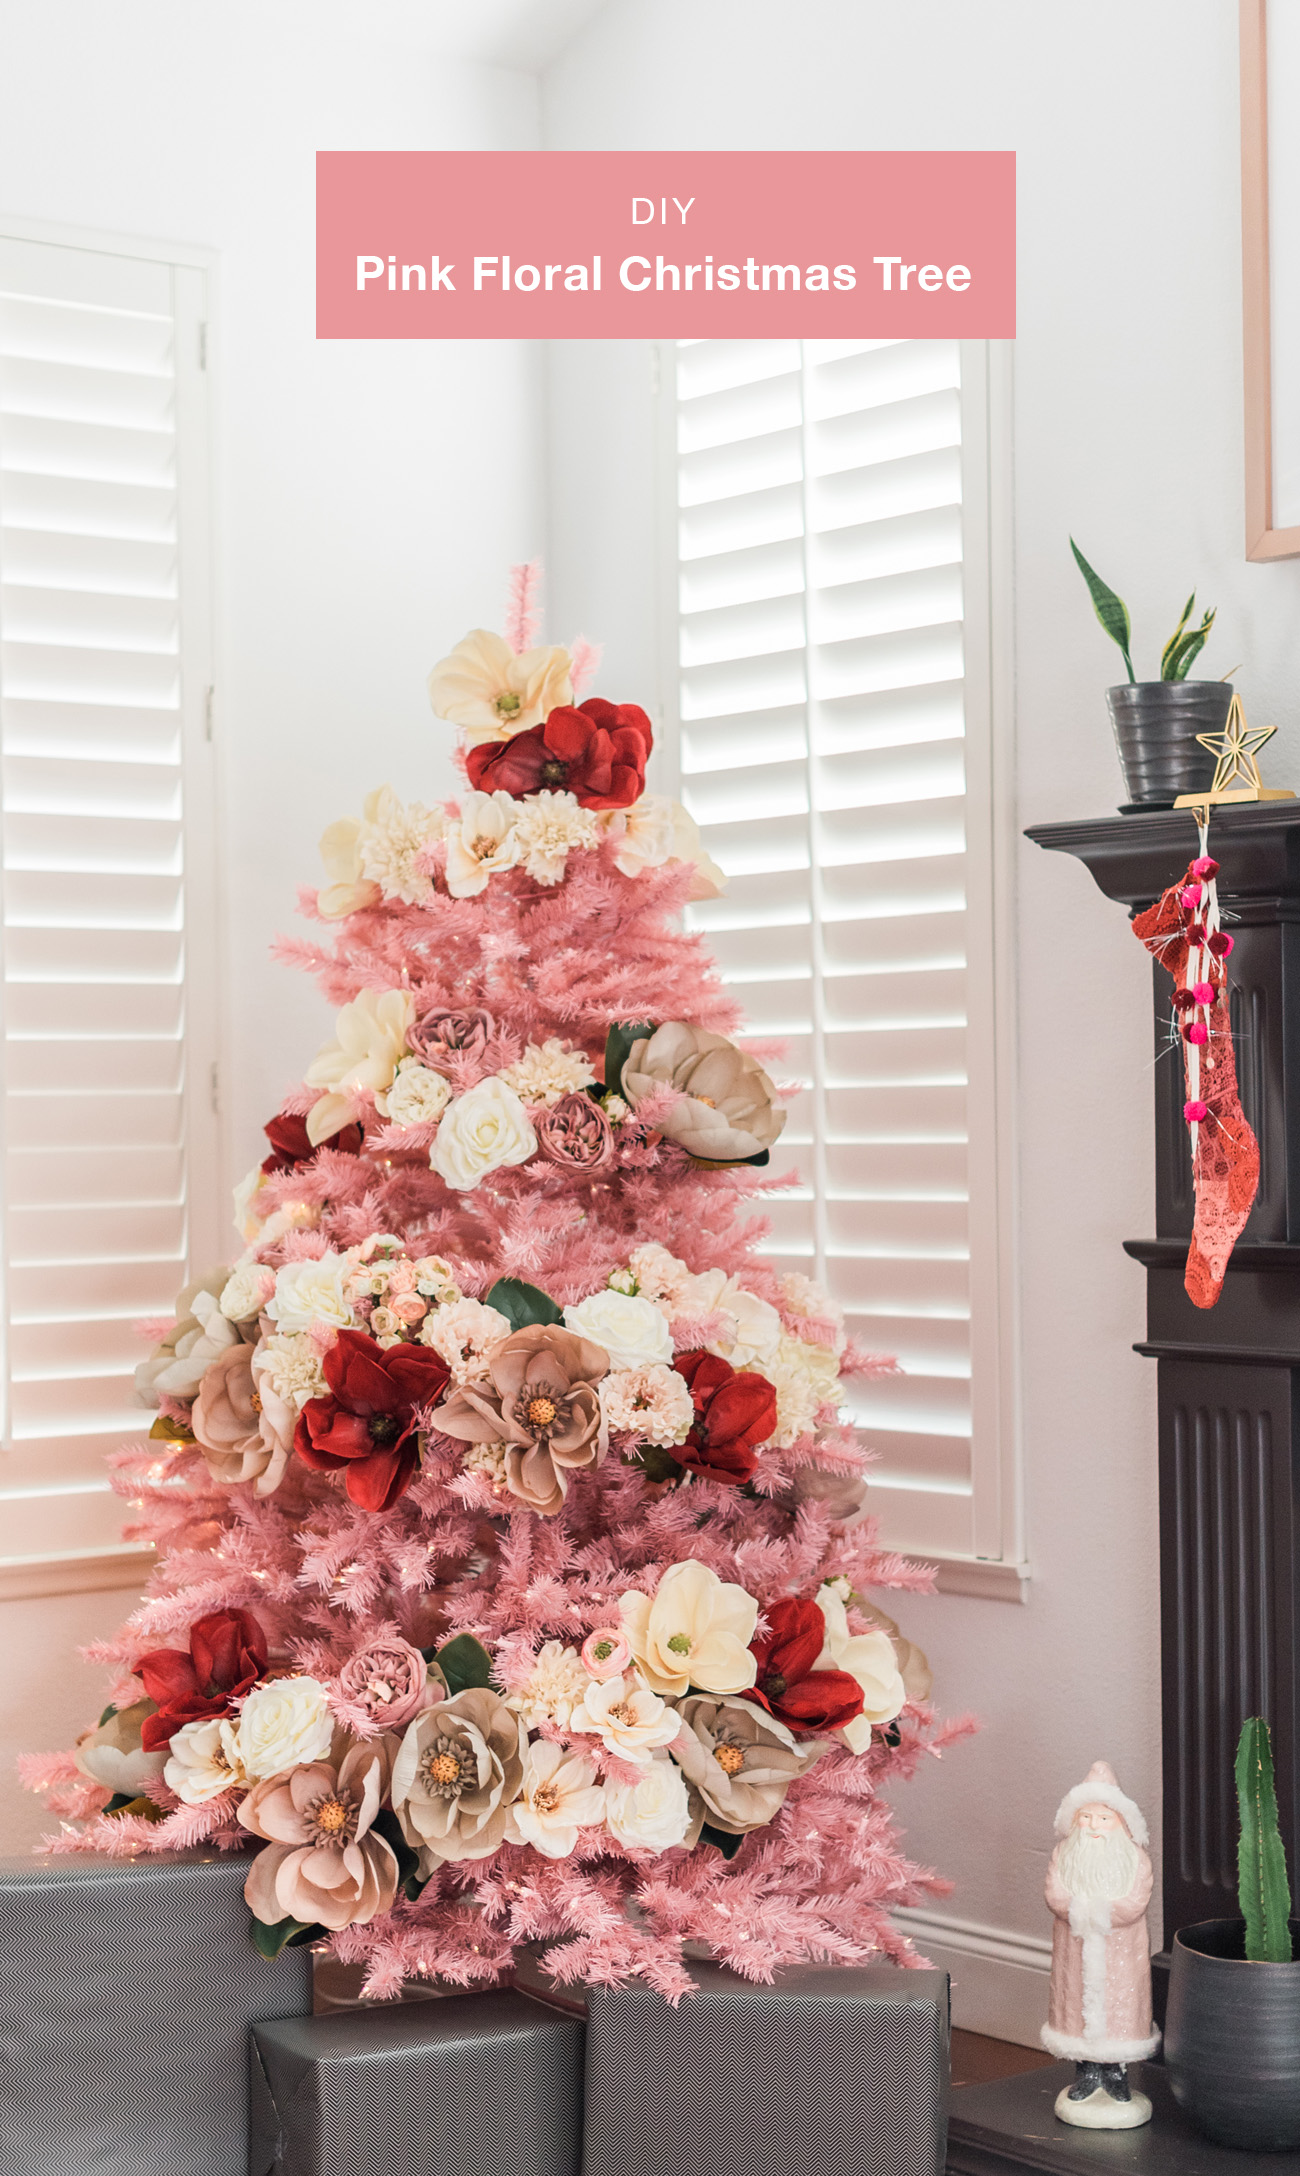 DIY a Pink Floral Christmas Tree 